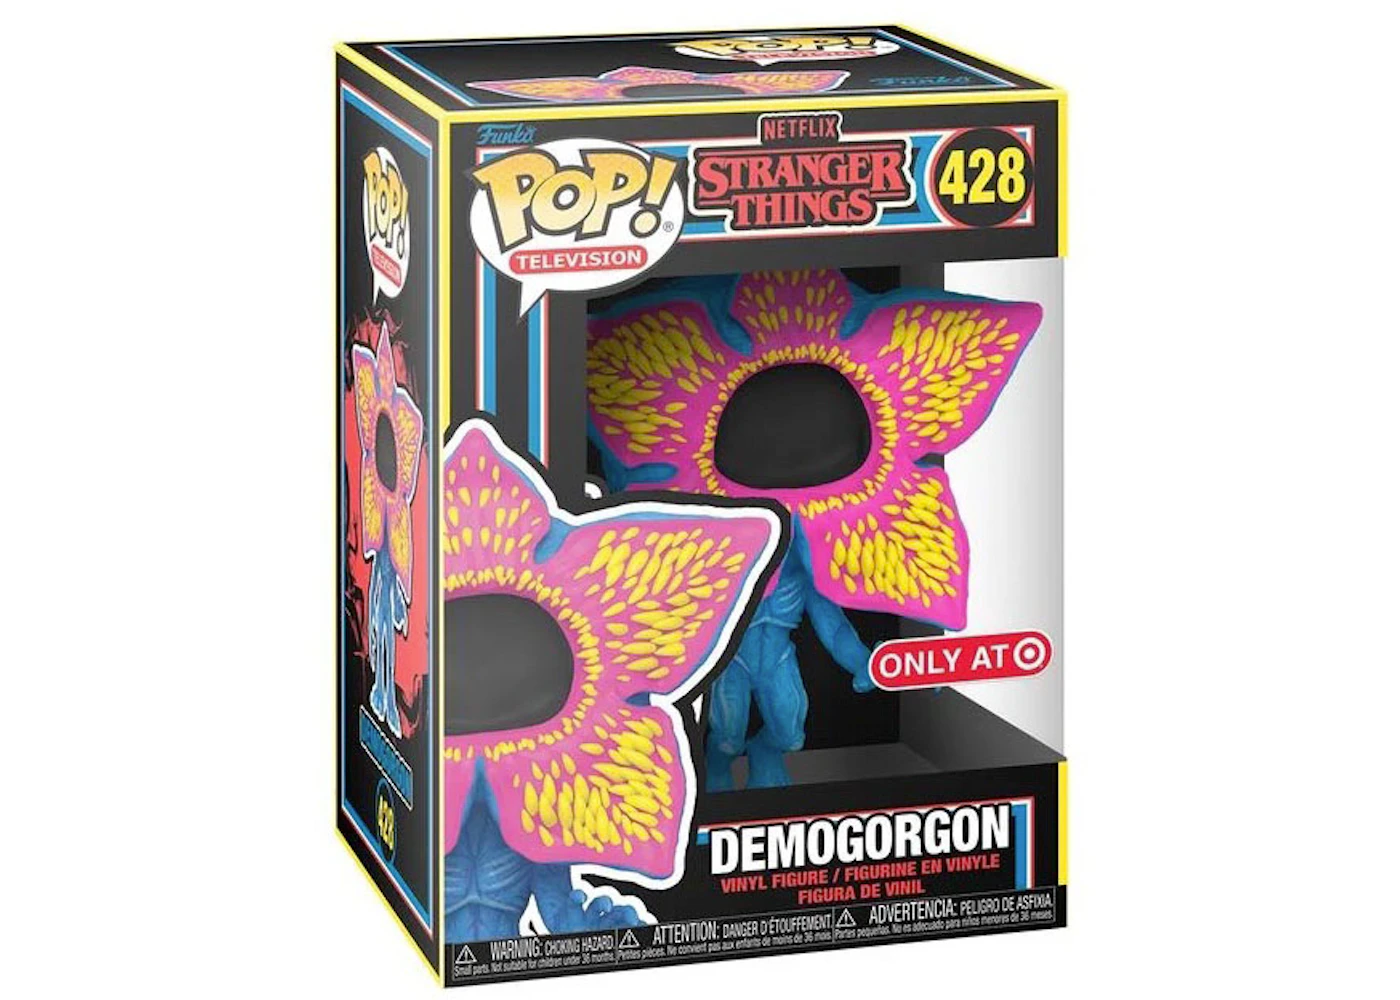 Funko Pop! Television: Stranger Things – Demogorgon only at